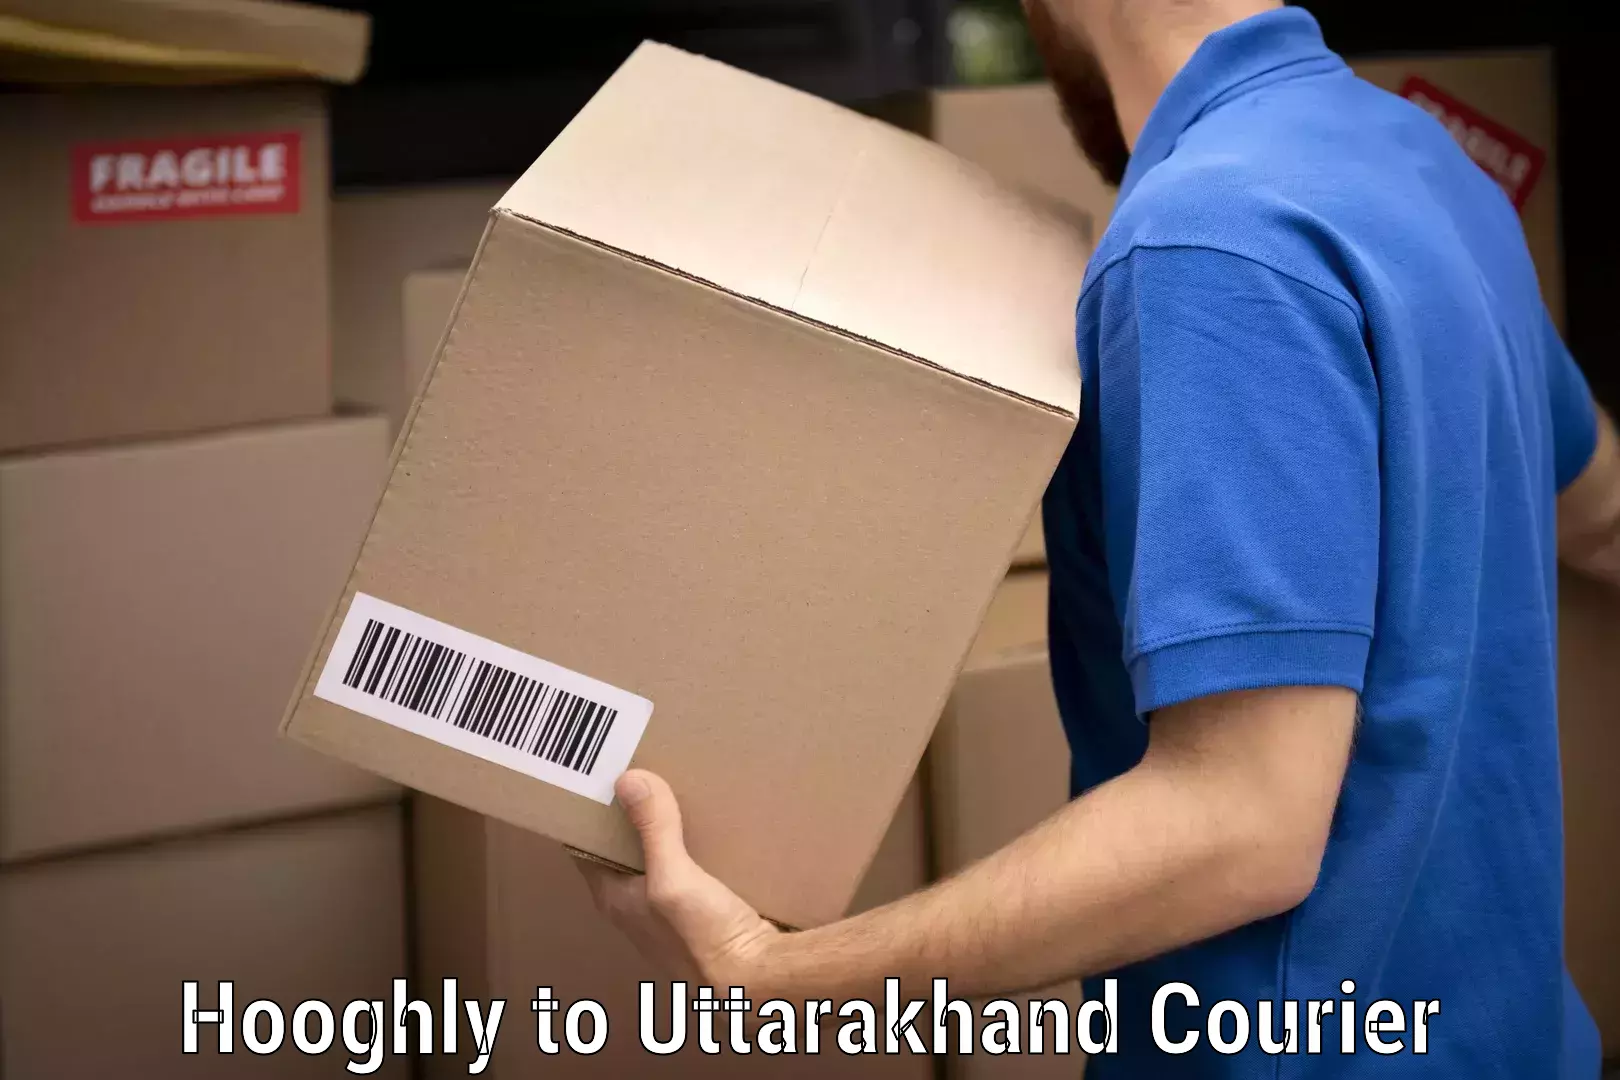 Furniture moving service Hooghly to Uttarakhand